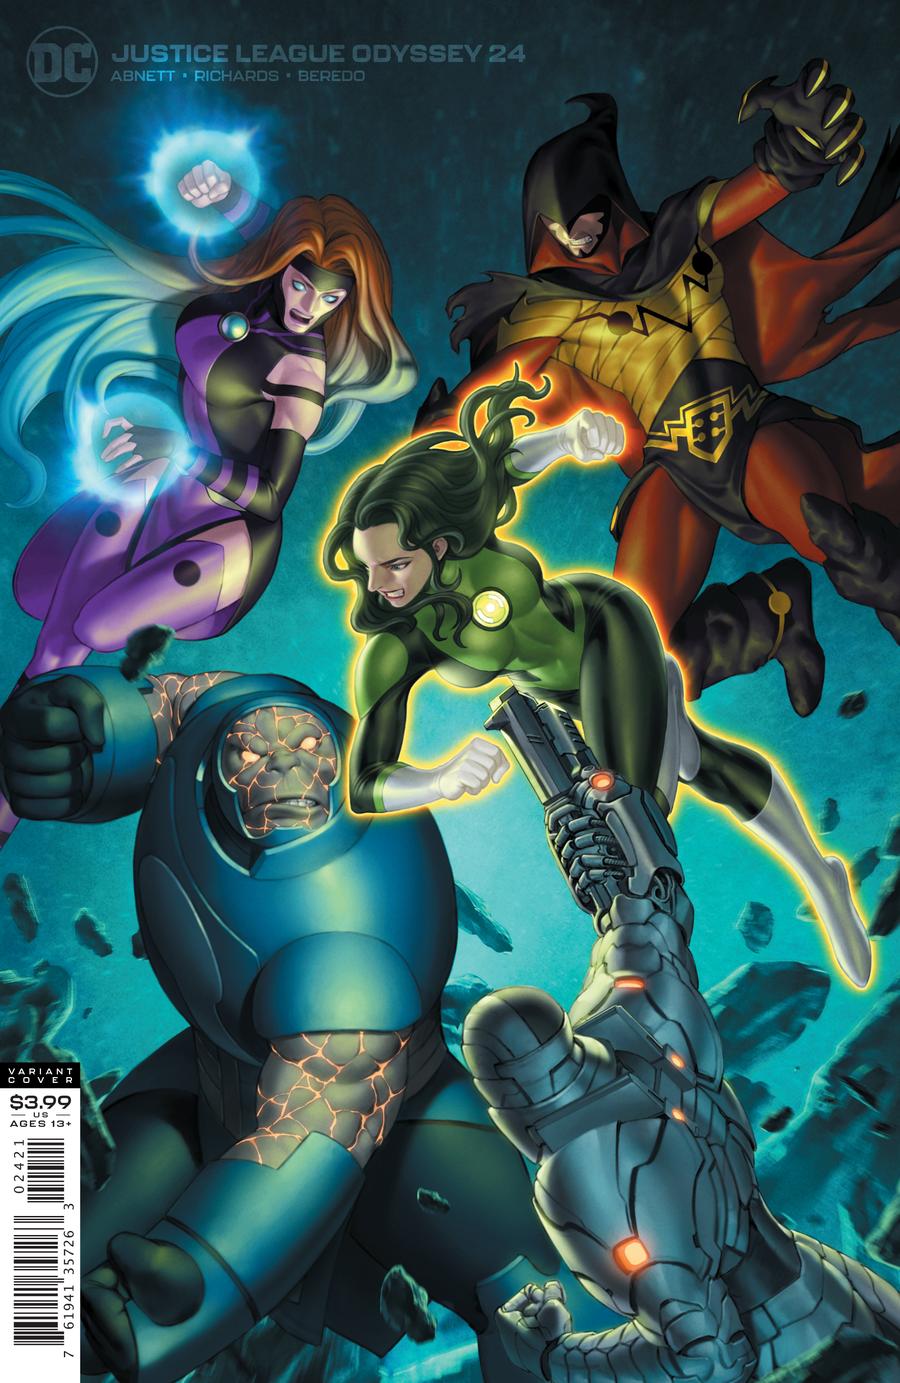 Justice League Odyssey 24 - Heroes Cave